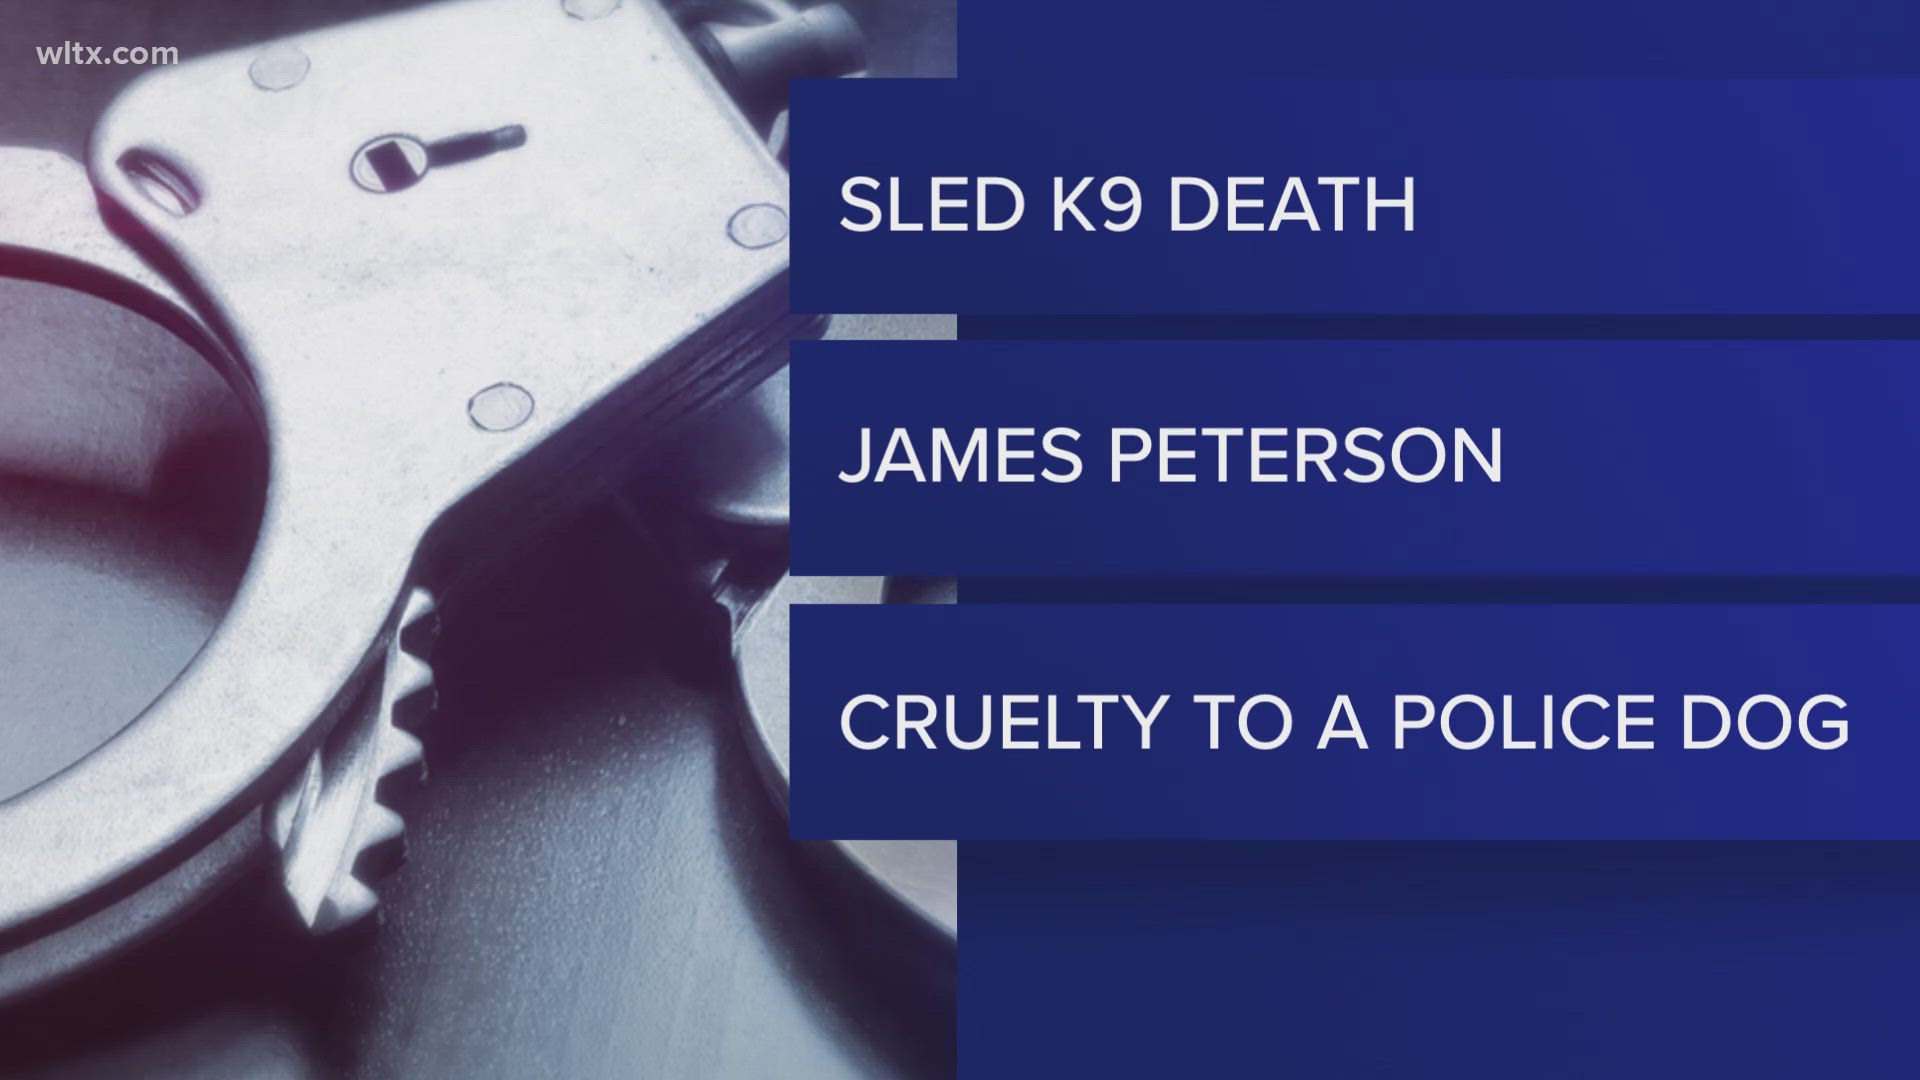 James Robert Peterson faces multiple charges, including cruelty to a police dog, after allegedly shooting and killing SLED K-9 Coba during an arrest attempt.